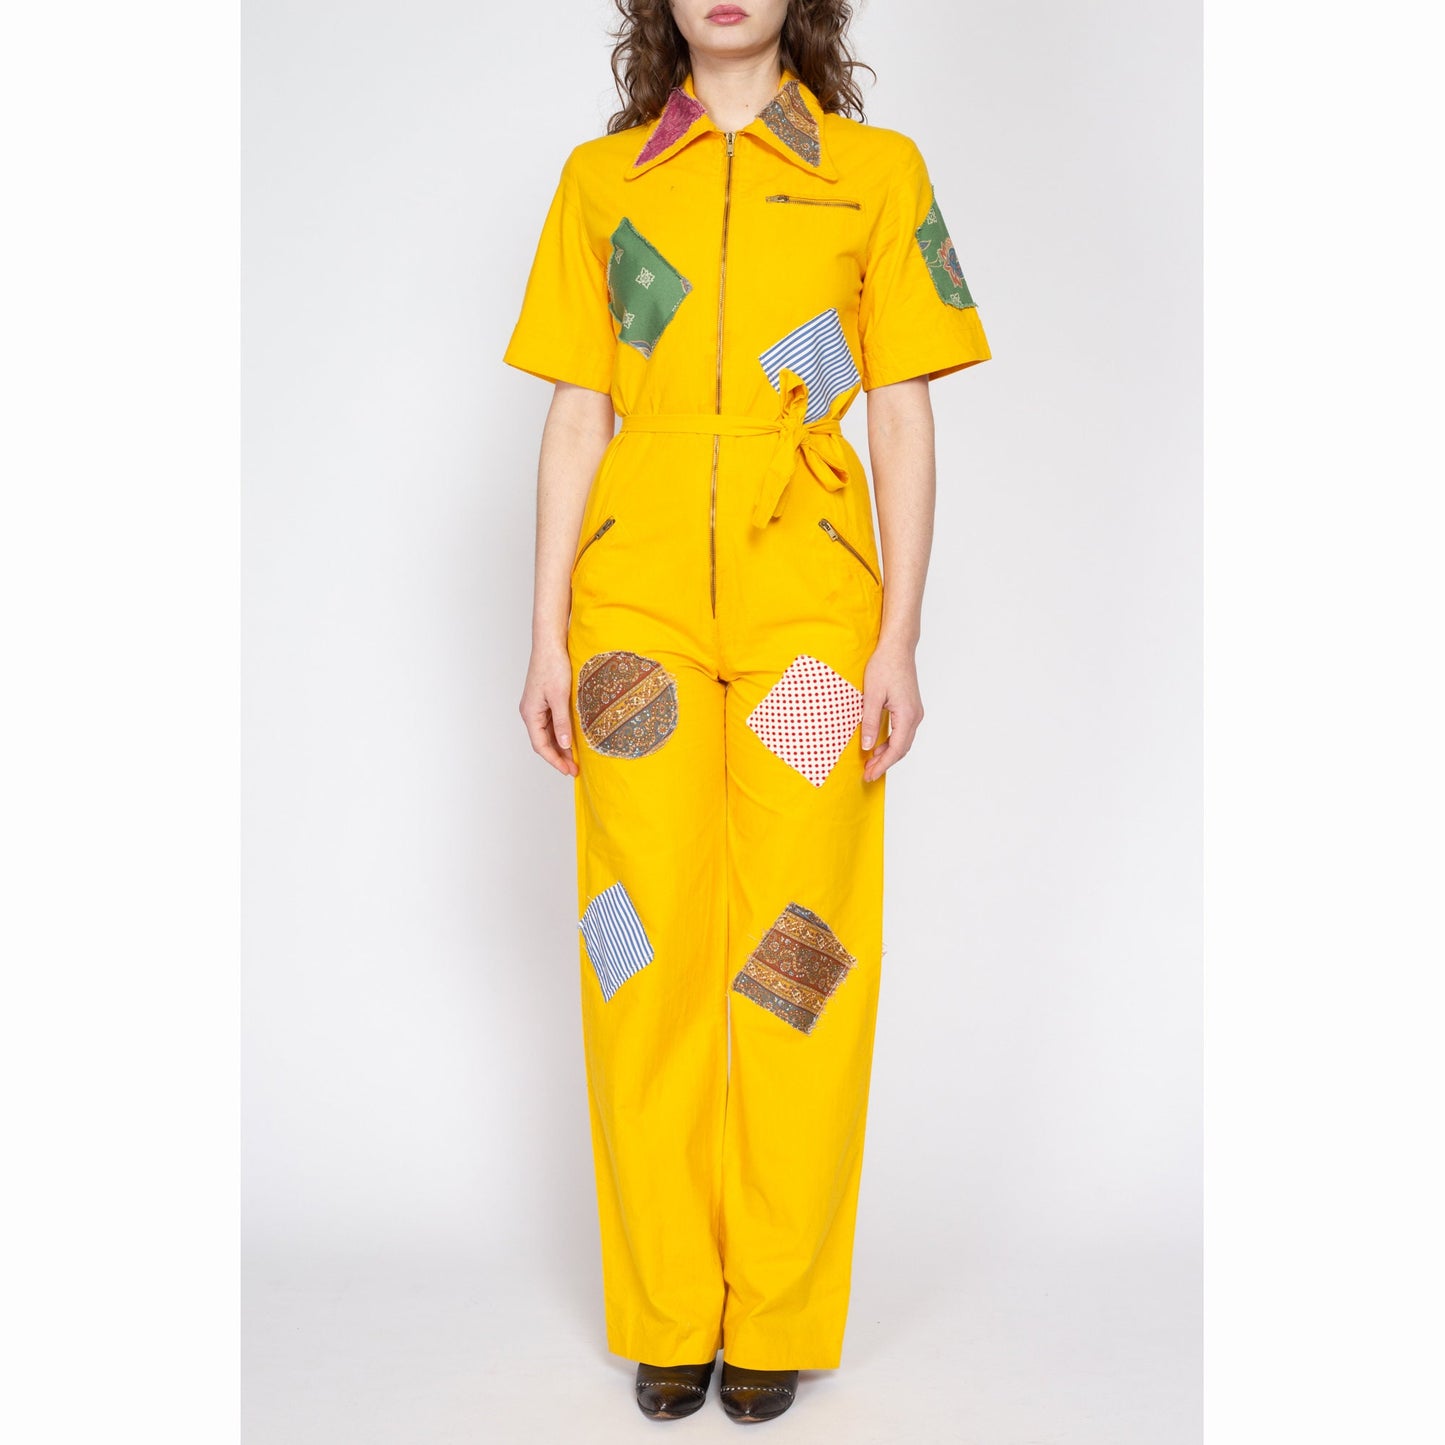 Medium 70s Yellow Patchwork Coverall Jumpsuit | Retro Vintage Collared Straight Leg Zip Up Boiler Suit One Piece Outfit